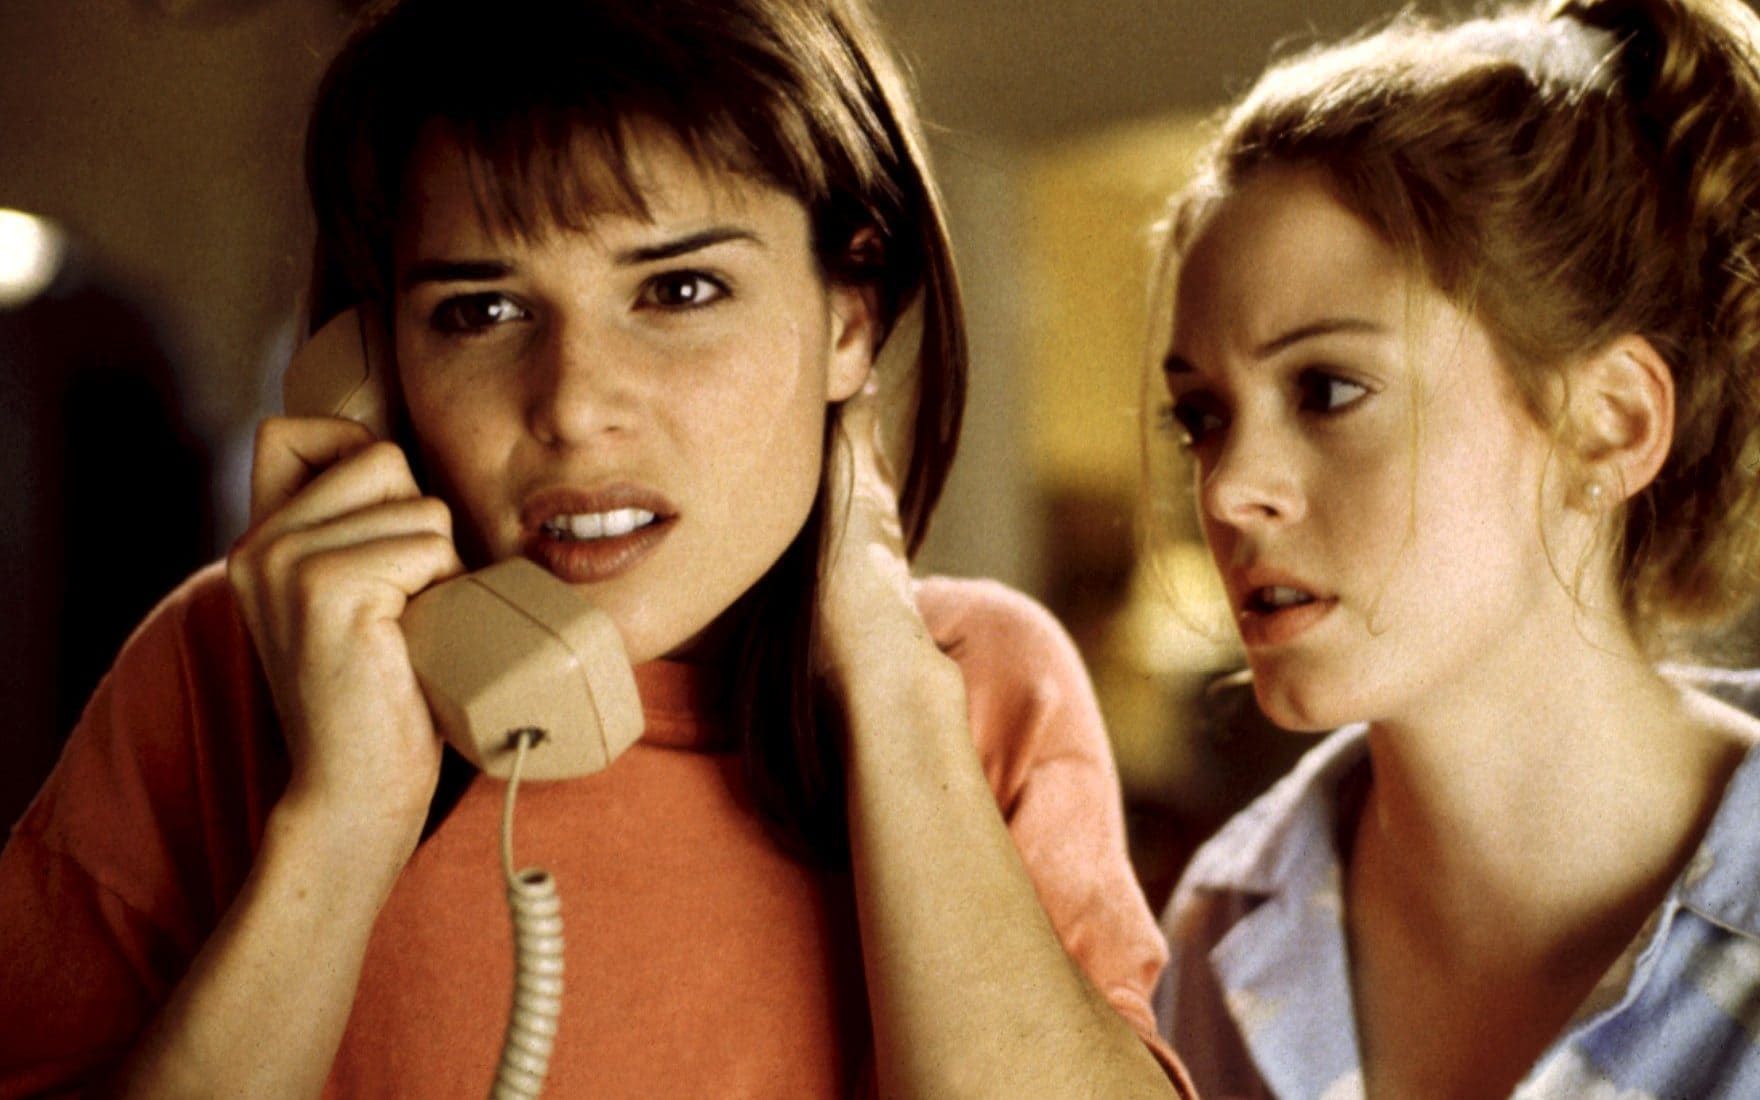 neve campbell as sidney and rose mcgowan as tatum in scream movie